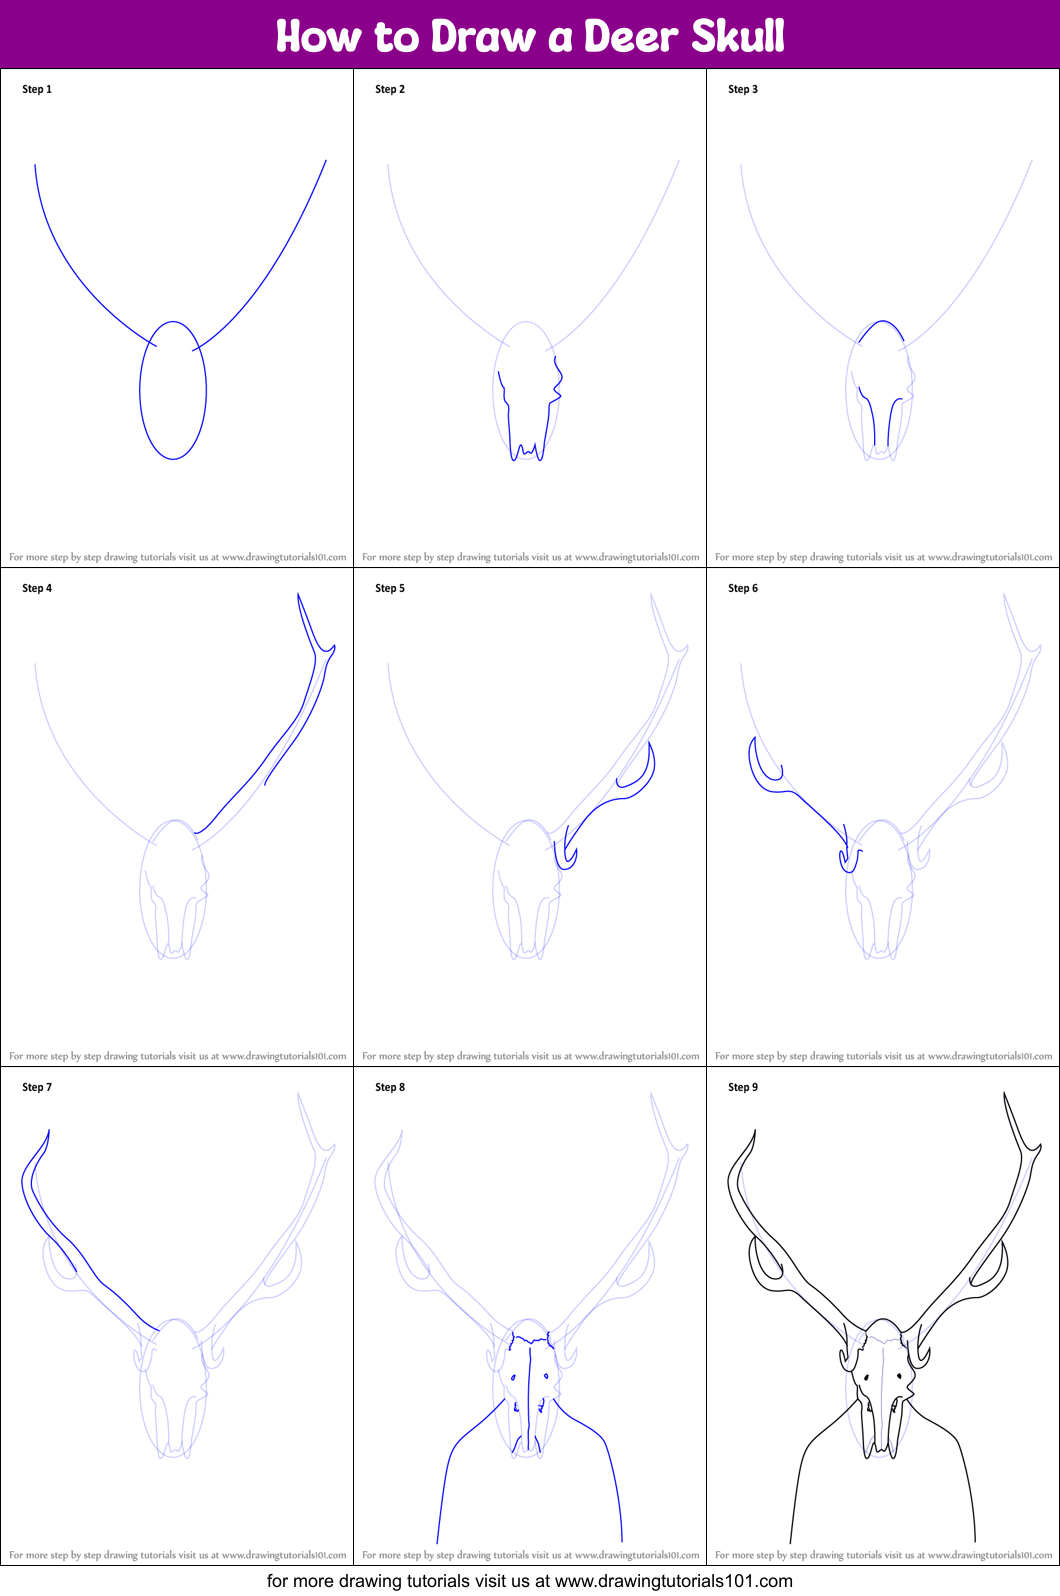 How to Draw a Deer Skull printable step by step drawing sheet